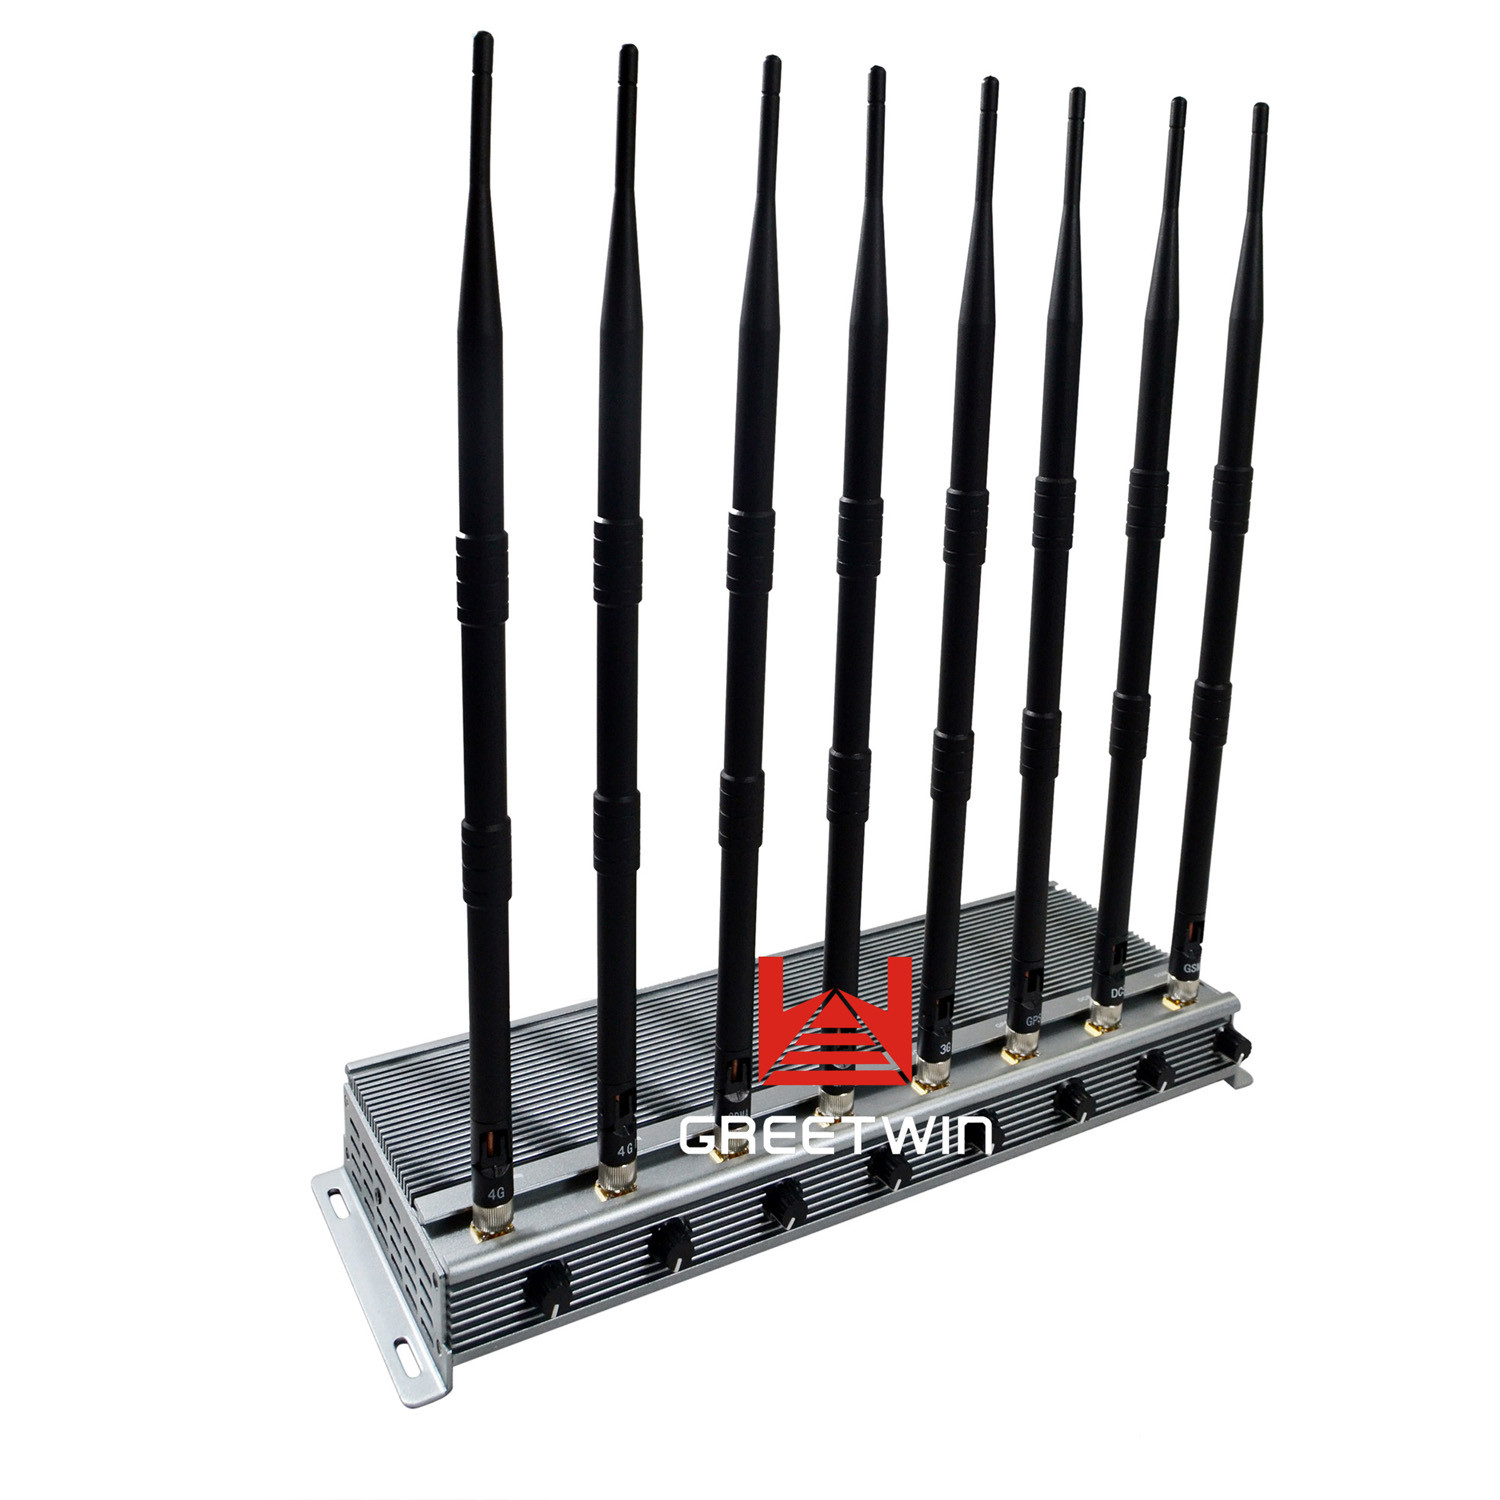 Powerful WIFI Mobile Phone Signal Jammer 8 Antennas Indoor Adjustable 46W Output Power